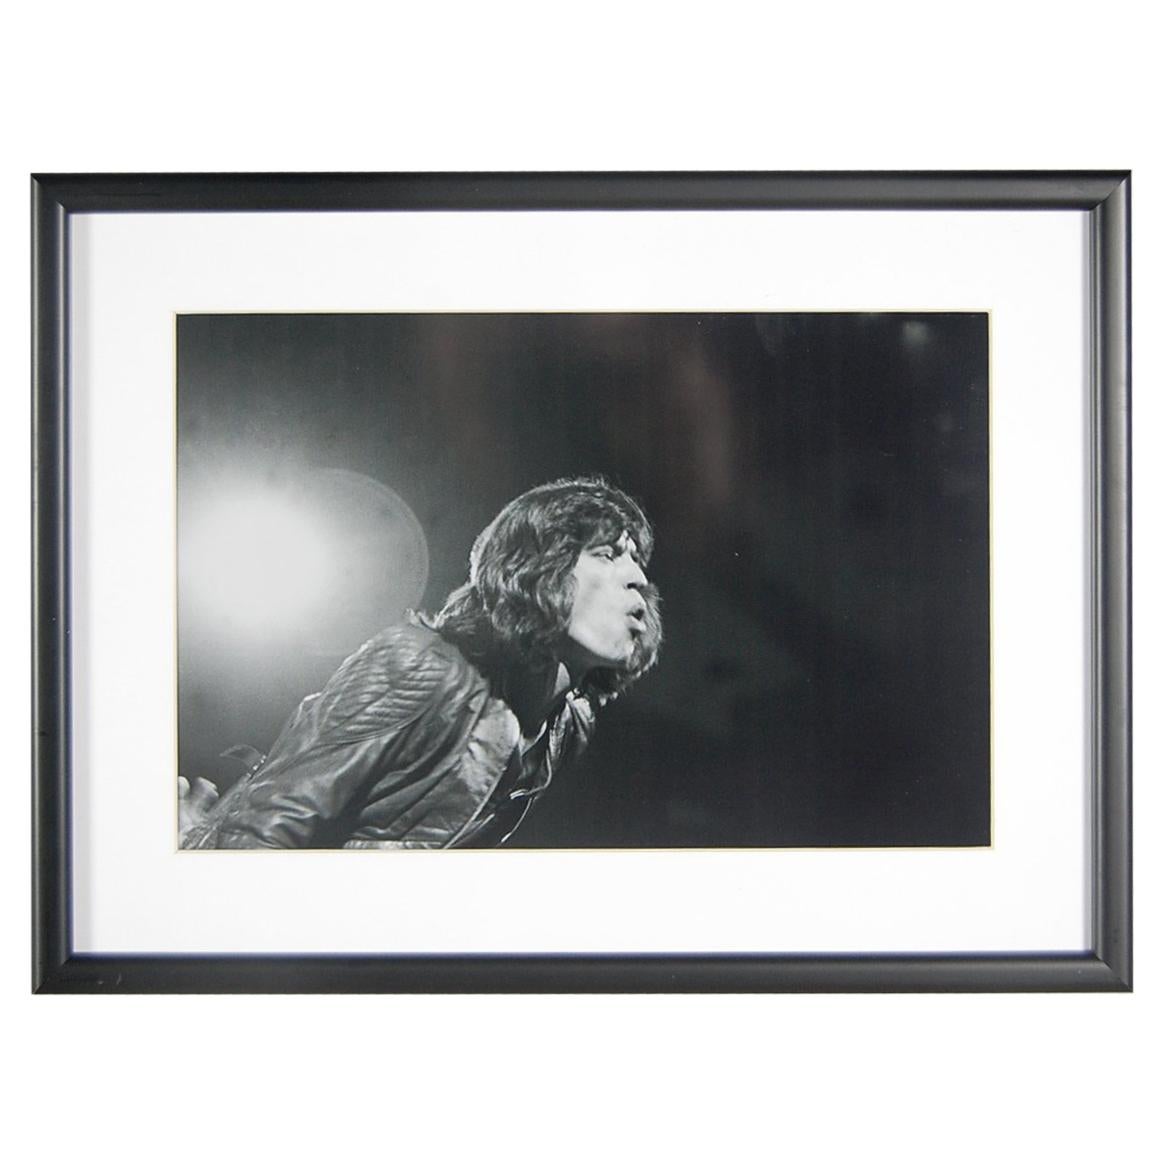 Mick Jagger Photograph - On Stage, London